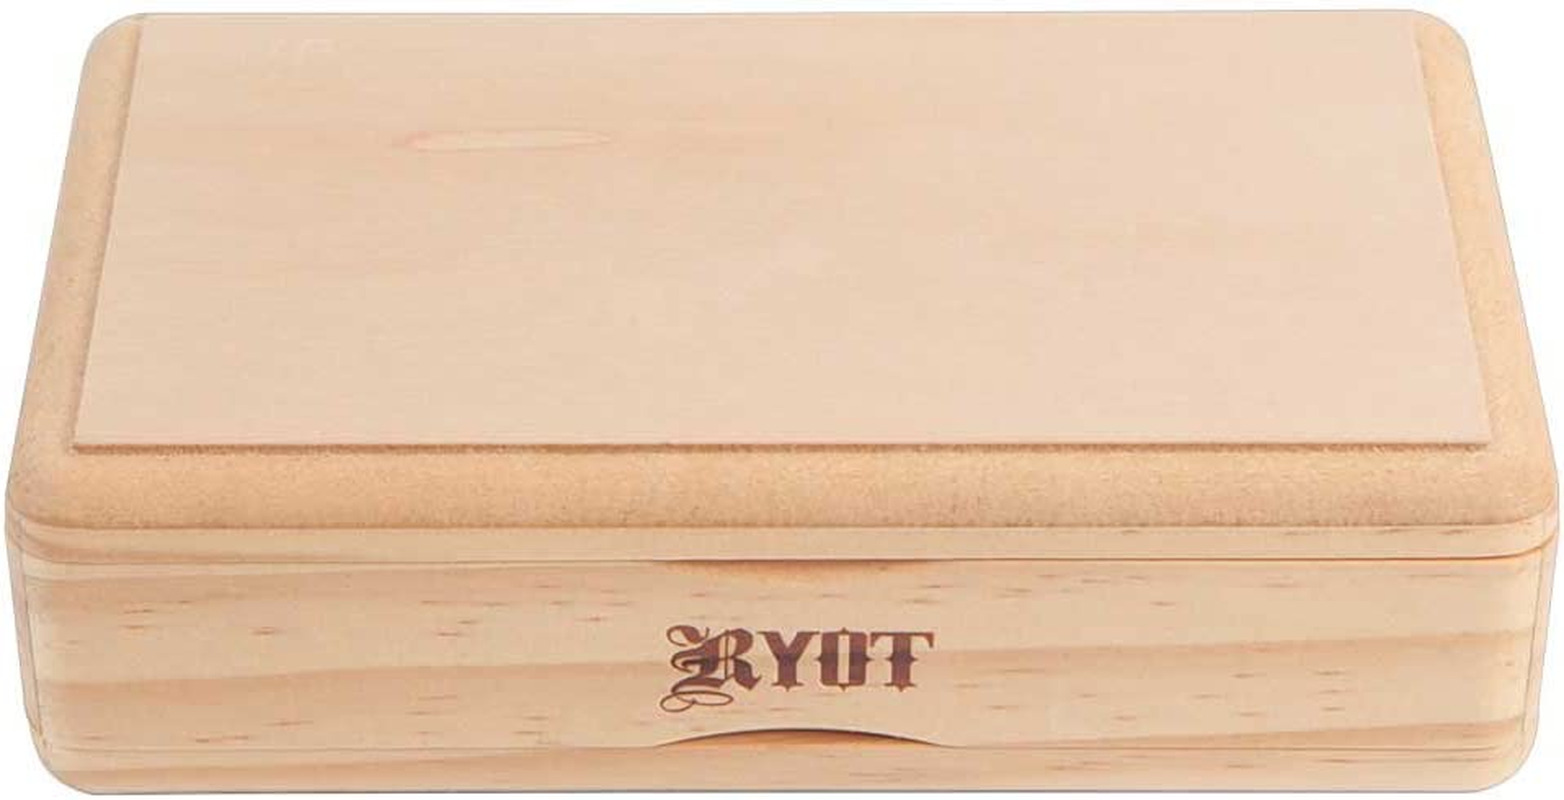 4X7” Solid Top Box in Natural | Premium Wooden Box Perfect for Sifter - Monofila